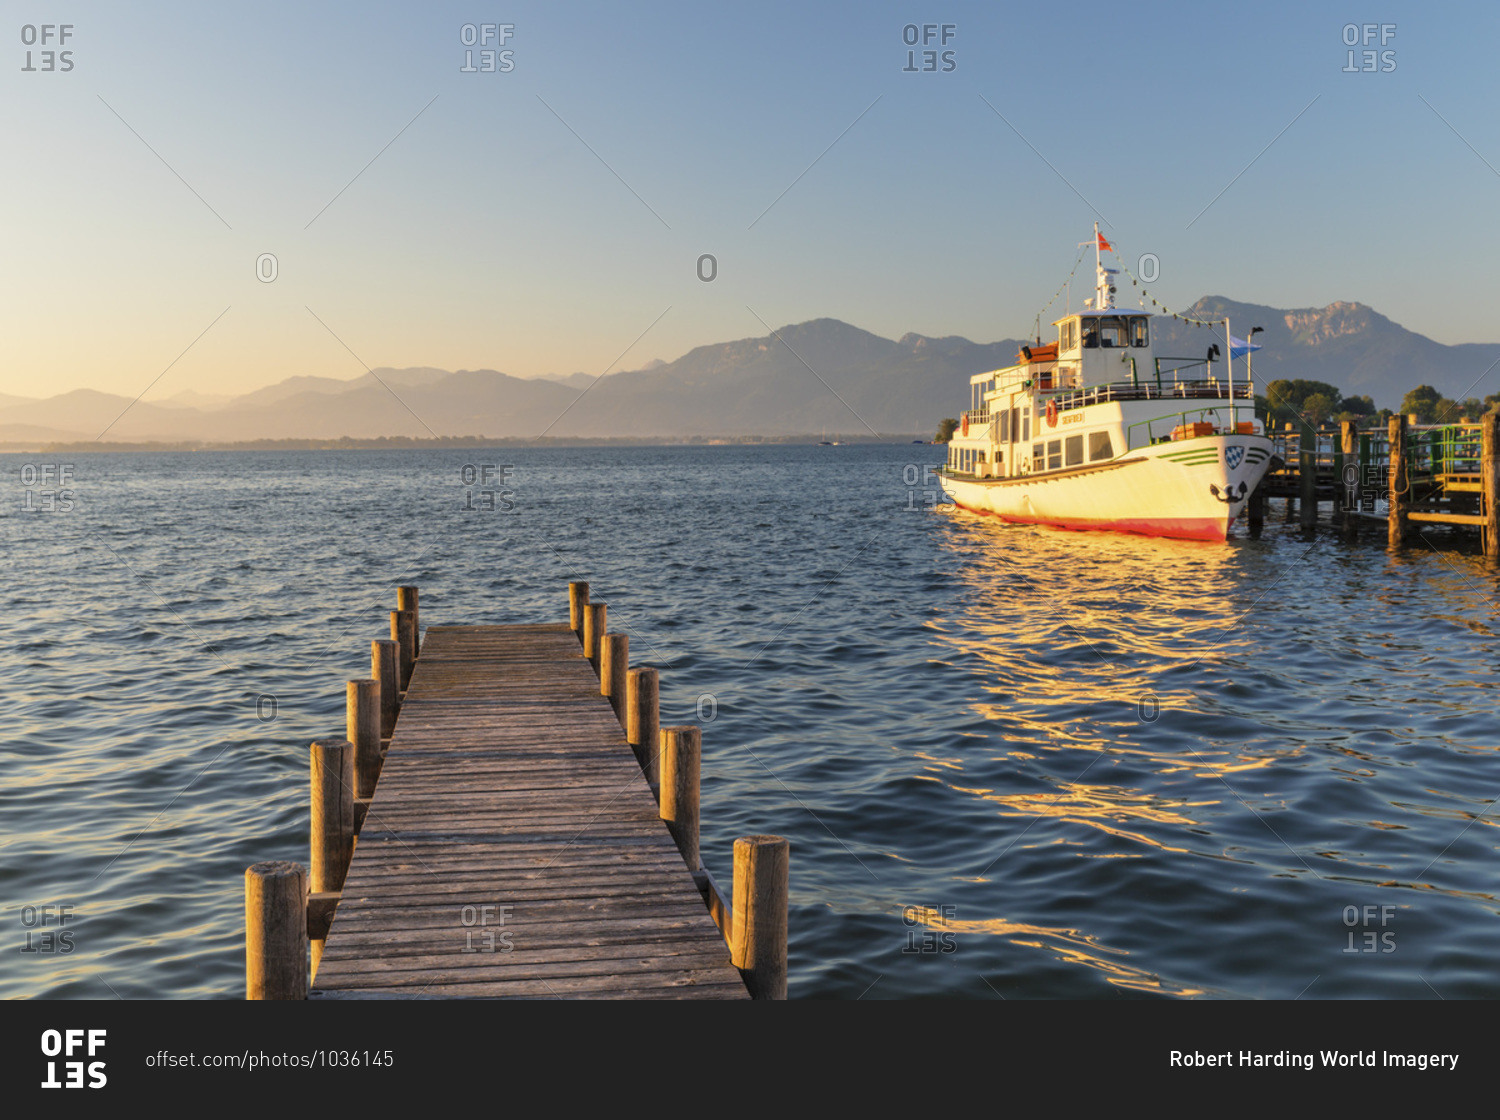 Excursion boat on a jetty at sunrise, Gstadt am Chiemsee, Lake Chiemsee, Upper Bavaria, Germany, Europe